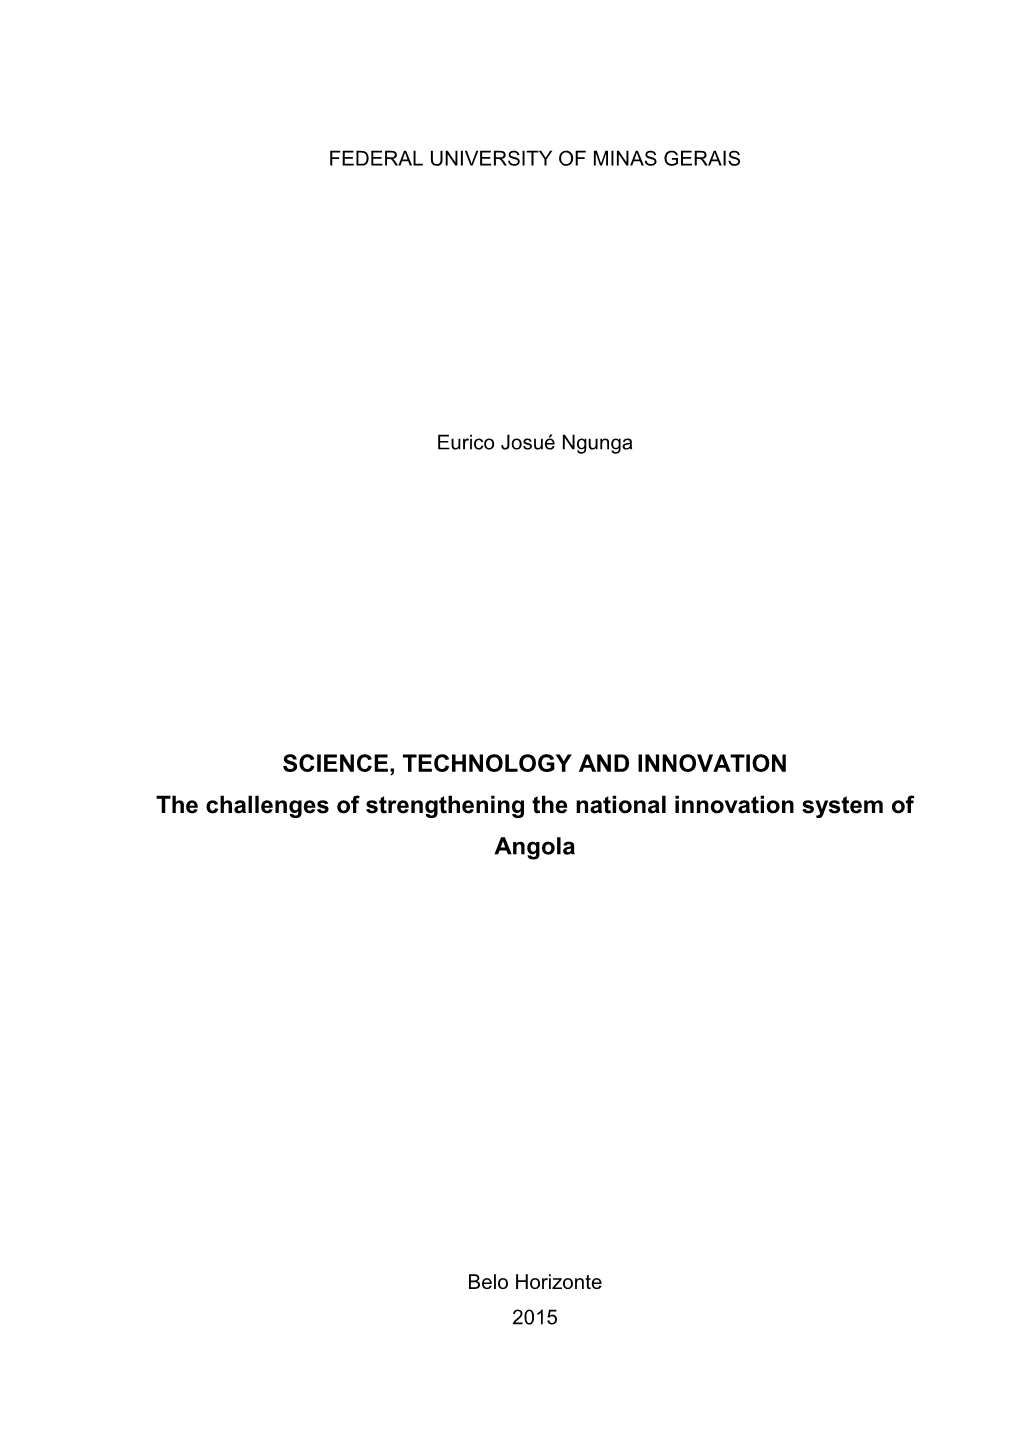 SCIENCE, TECHNOLOGY and INNOVATION the Challenges of Strengthening the National Innovation System of Angola